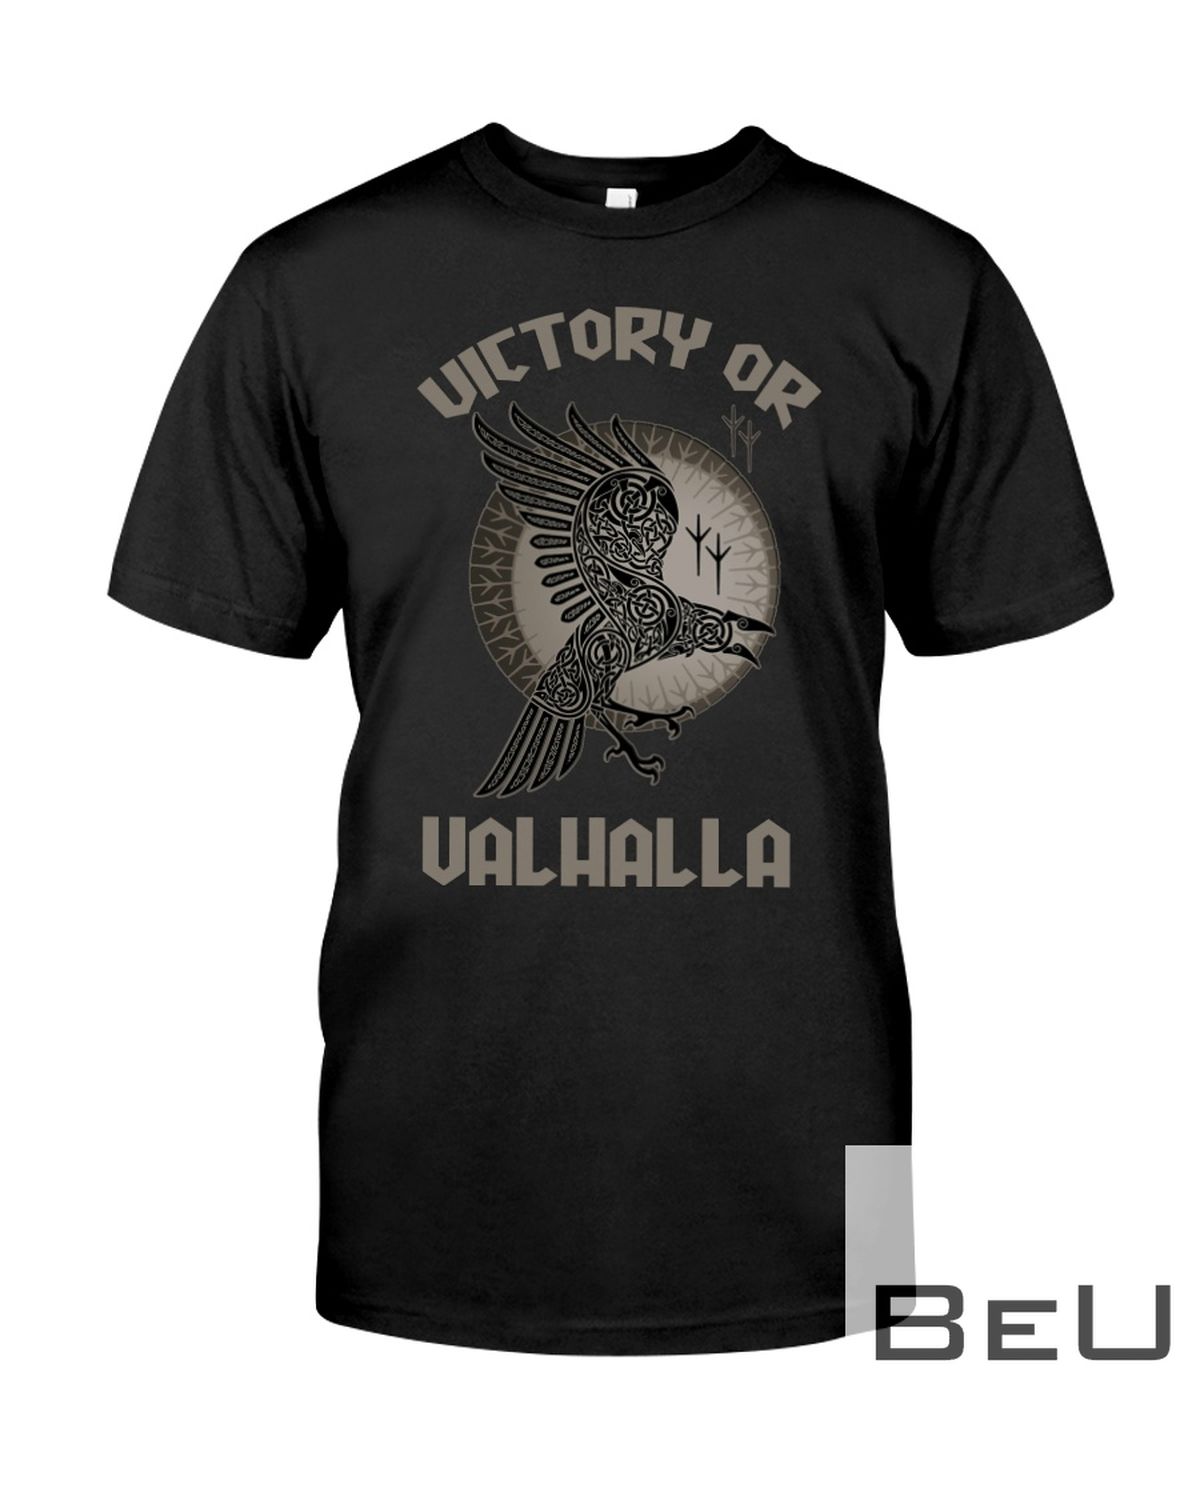 Victory Or Valhalla Shirt